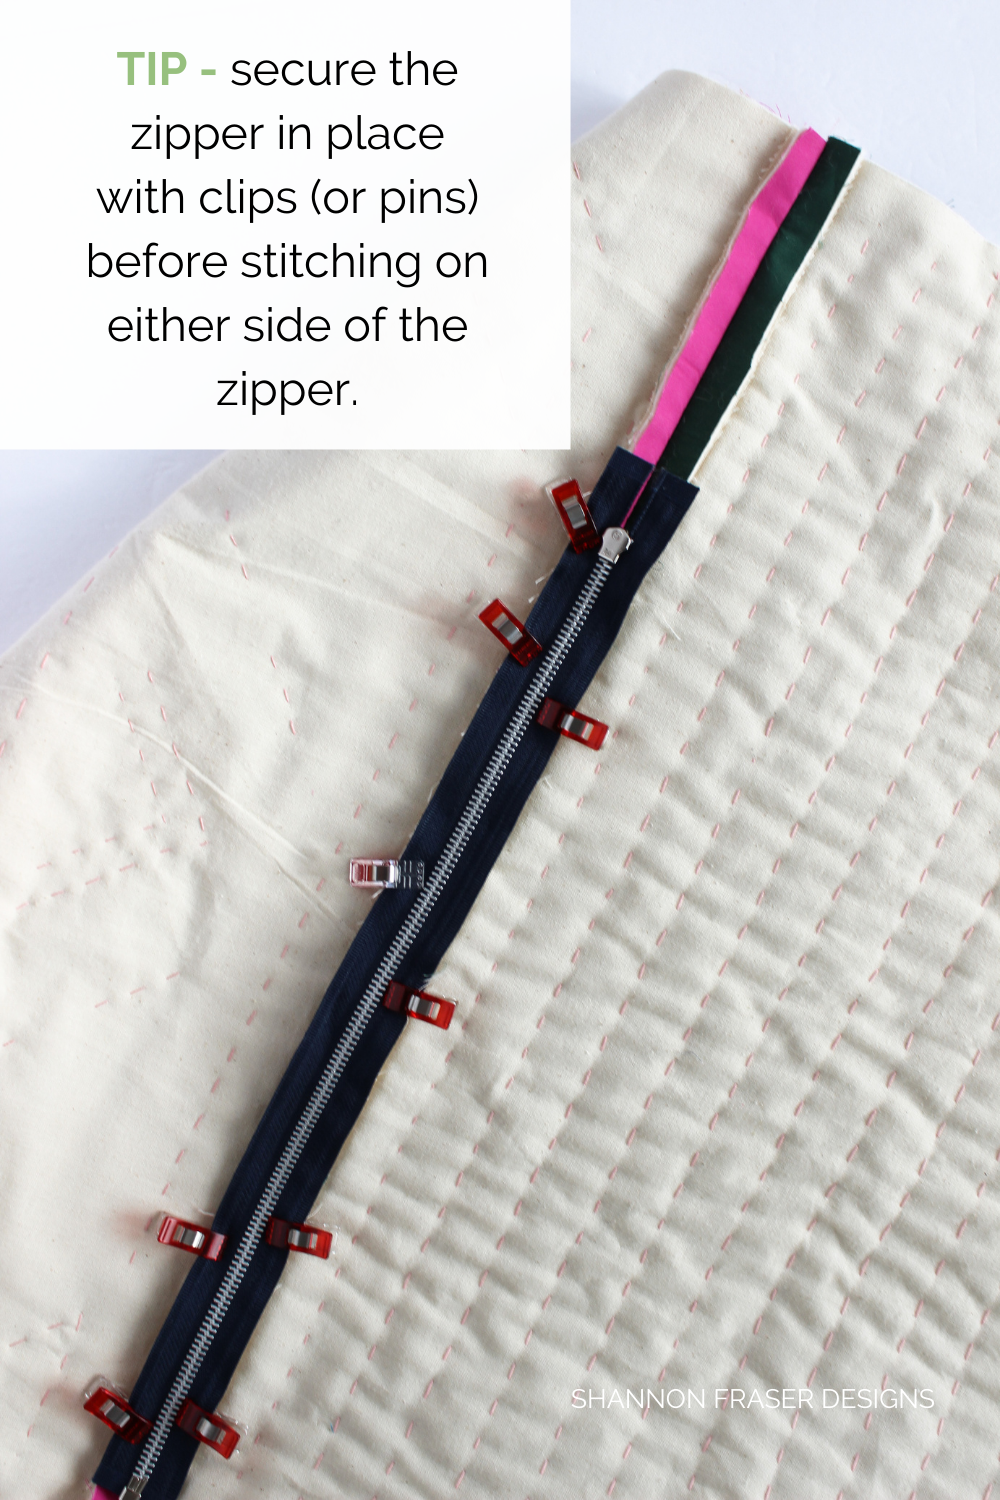 Metal zipper clipped into place in the basted seam allowance ready to be stitched in place | Sewing Tutorial | Shannon Fraser Designs #zipper #howto